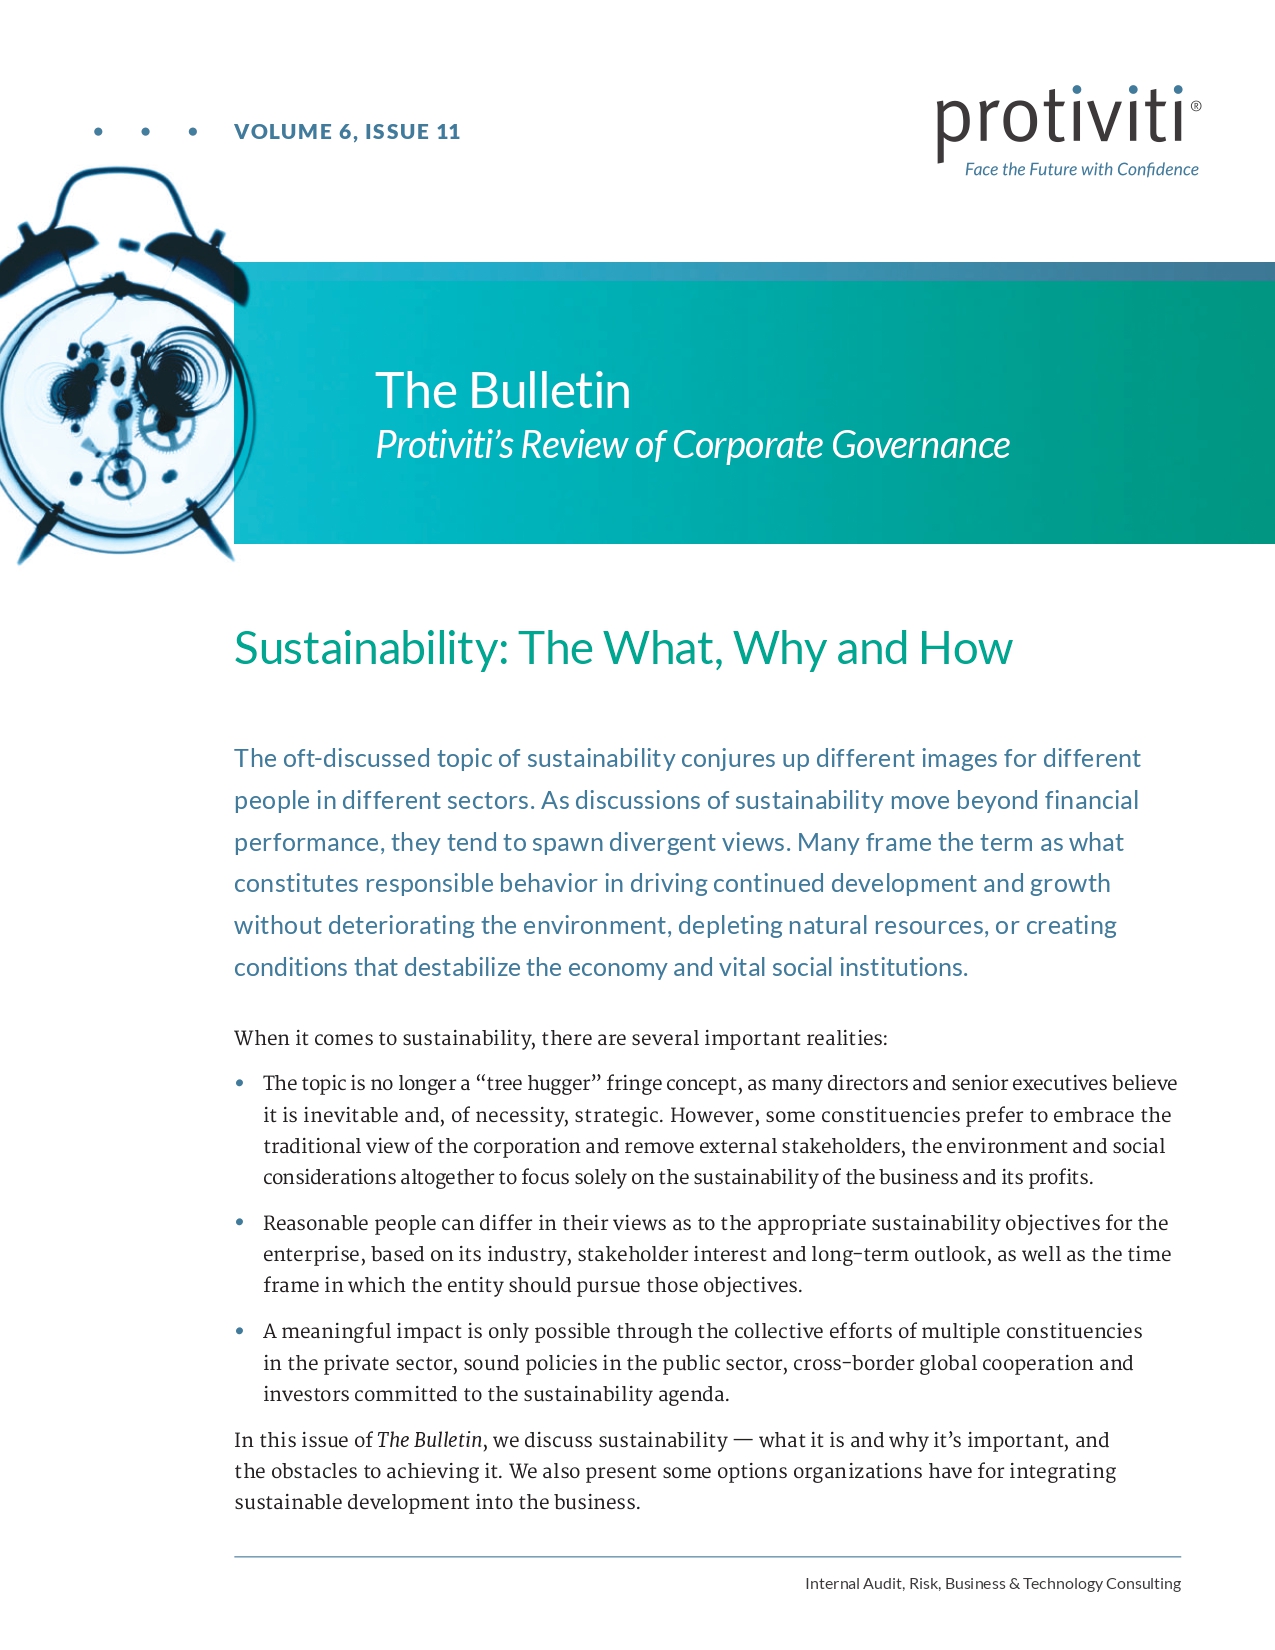 Screenshot of the first page of Sustainability - The What, Why and How